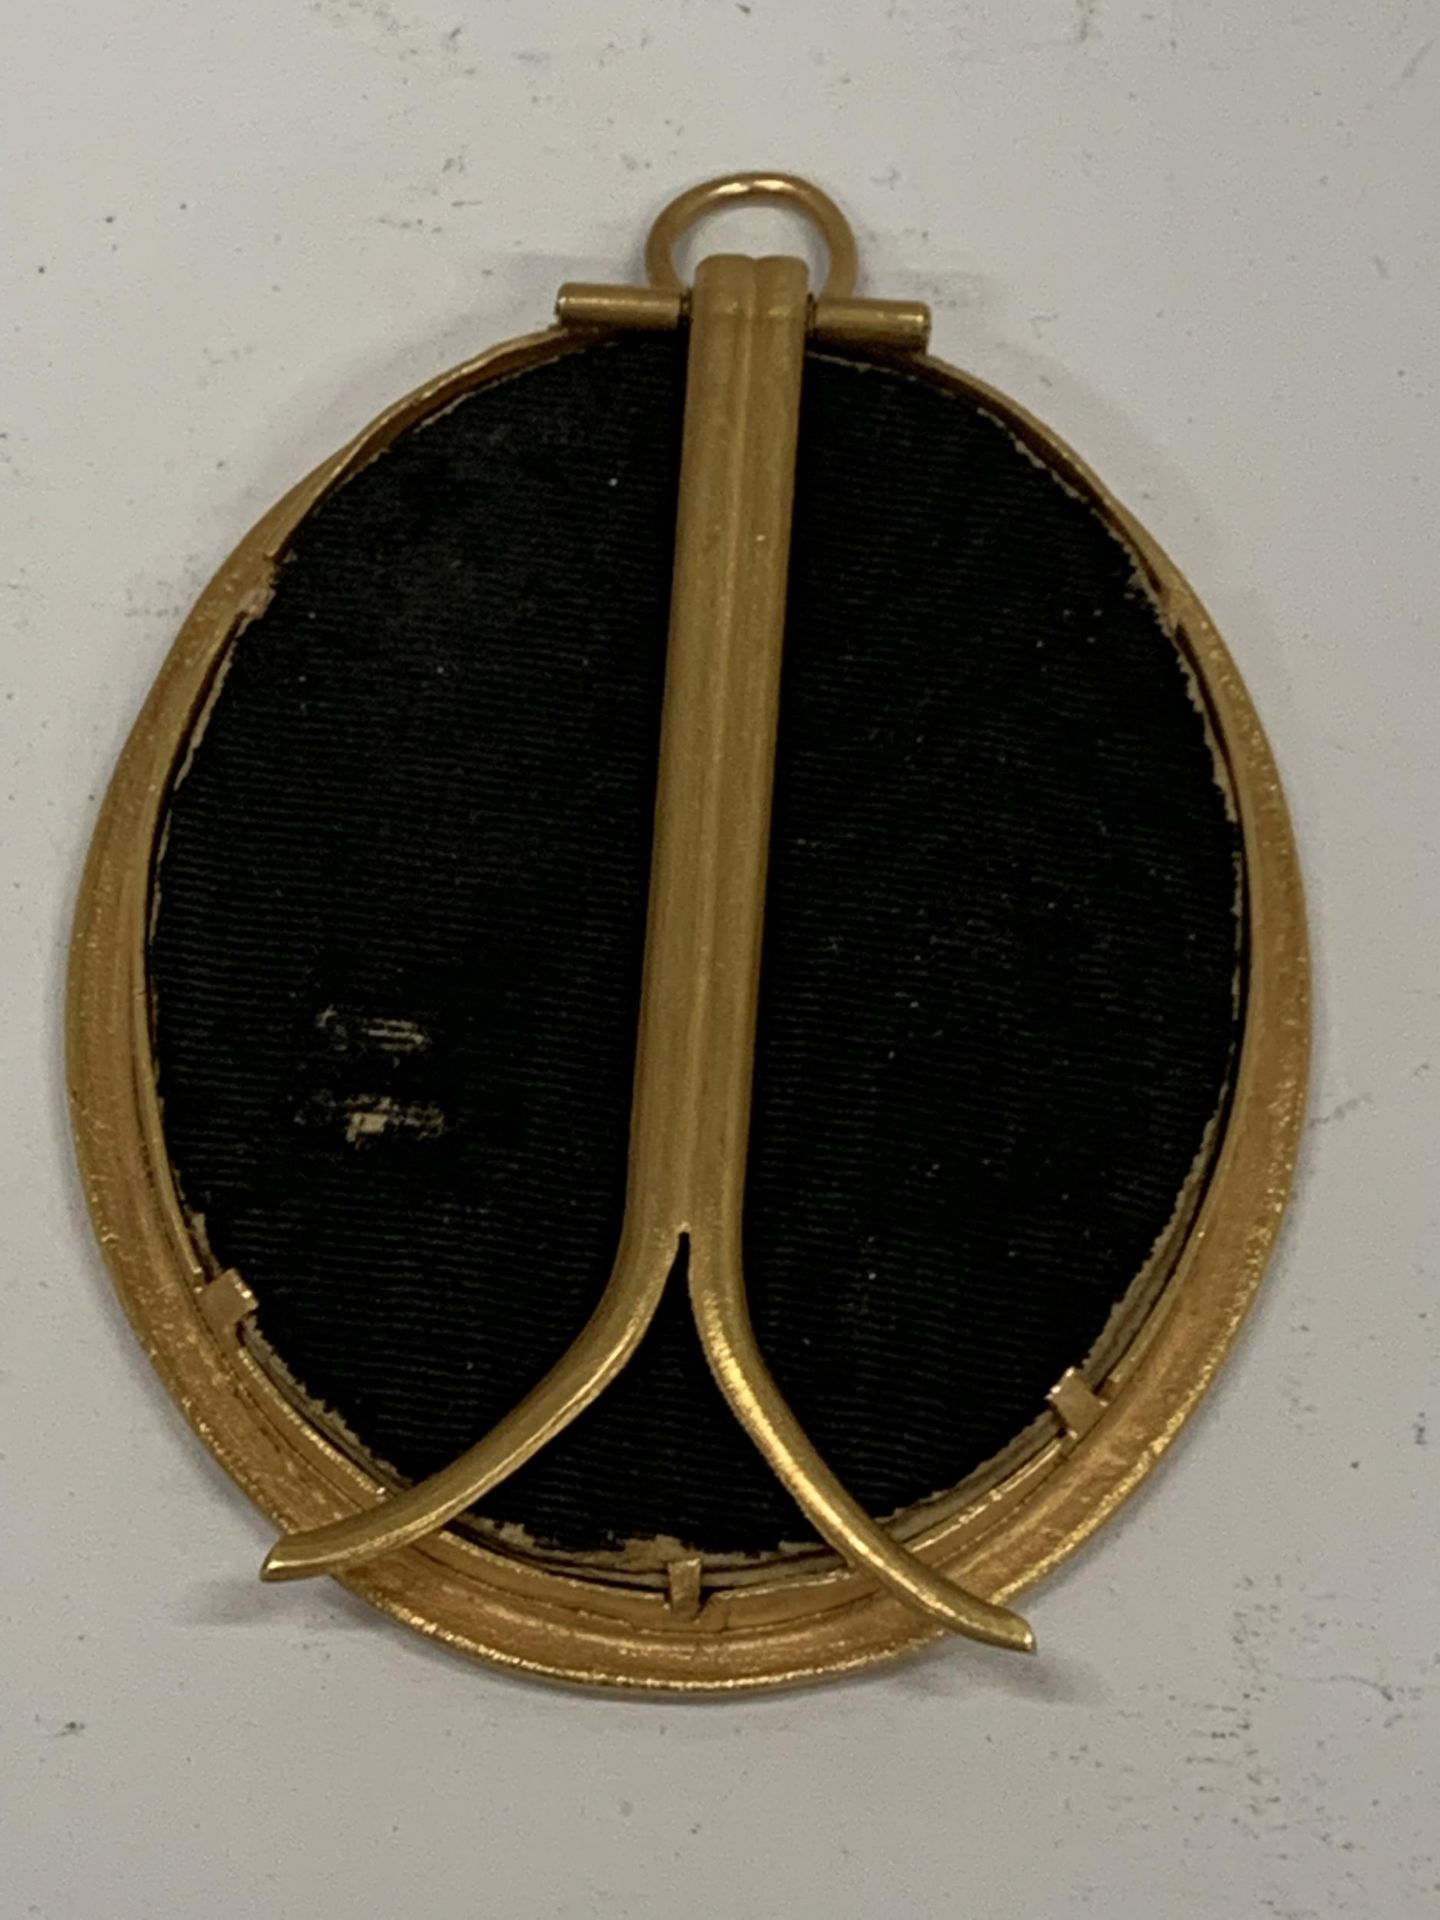 AN 18TH/19TH CENTURY PORTRAIT MINIATURE IN GILT EASEL FRAME, LENGTH 7CM - Image 3 of 4